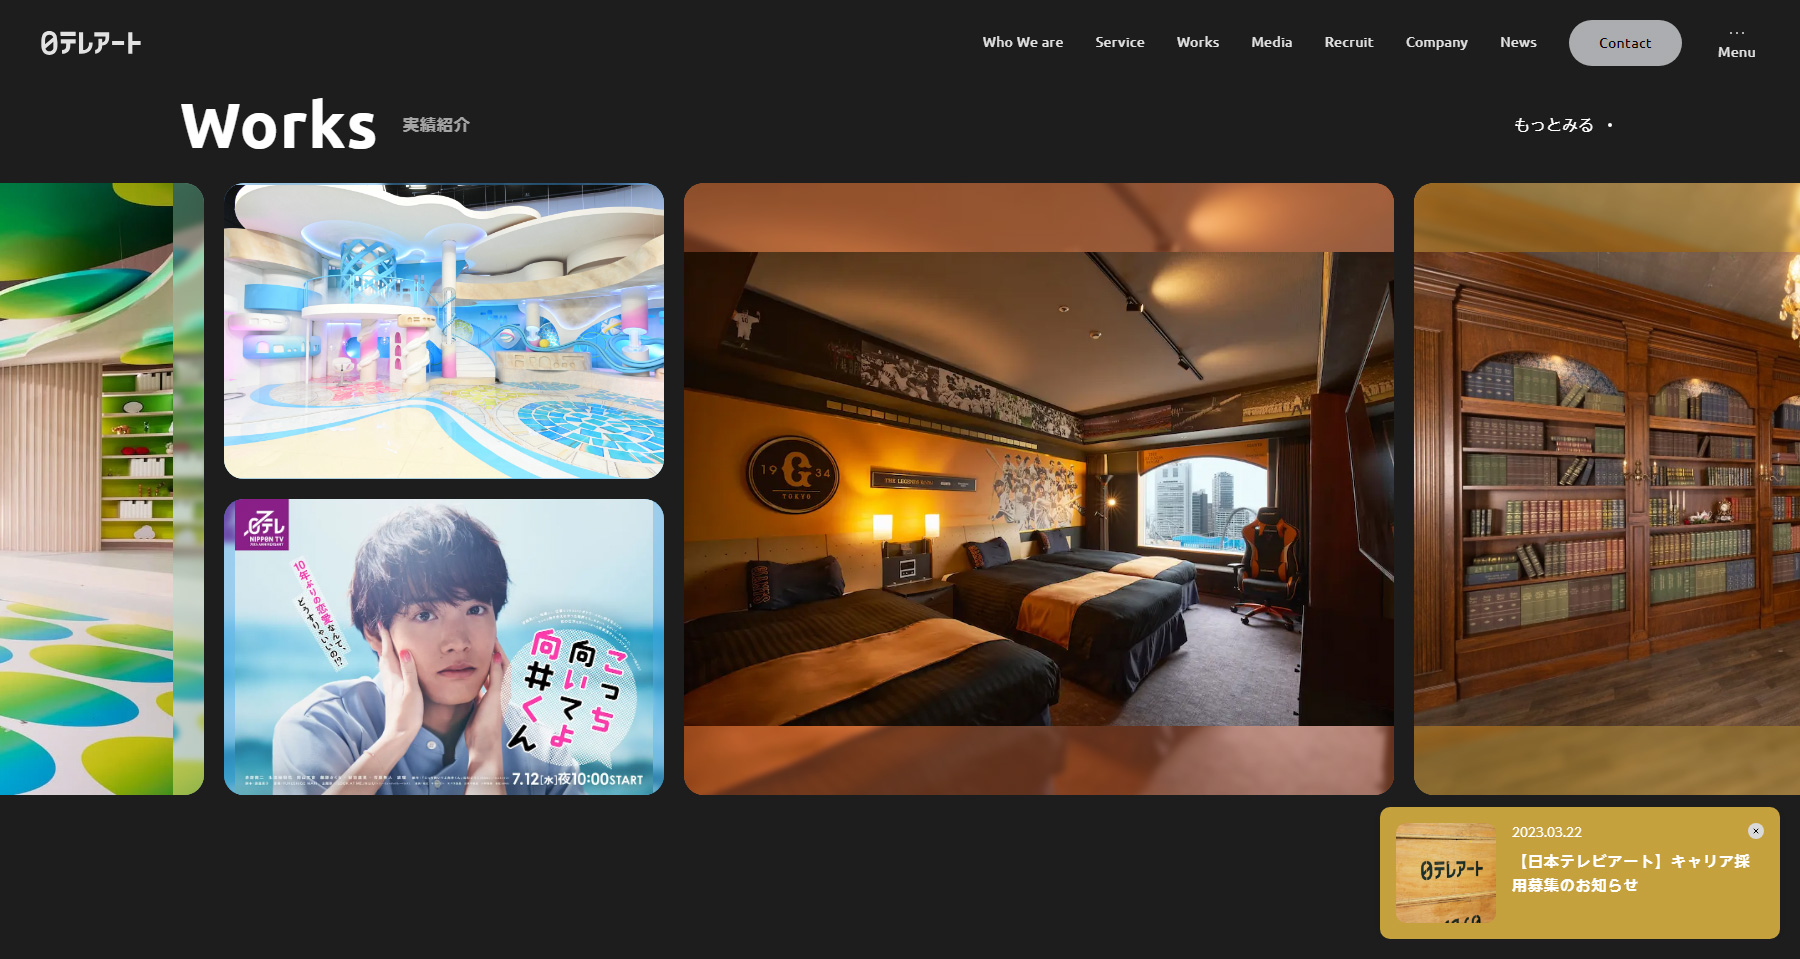 NIPPON TELEVISION ART - Website of the Day